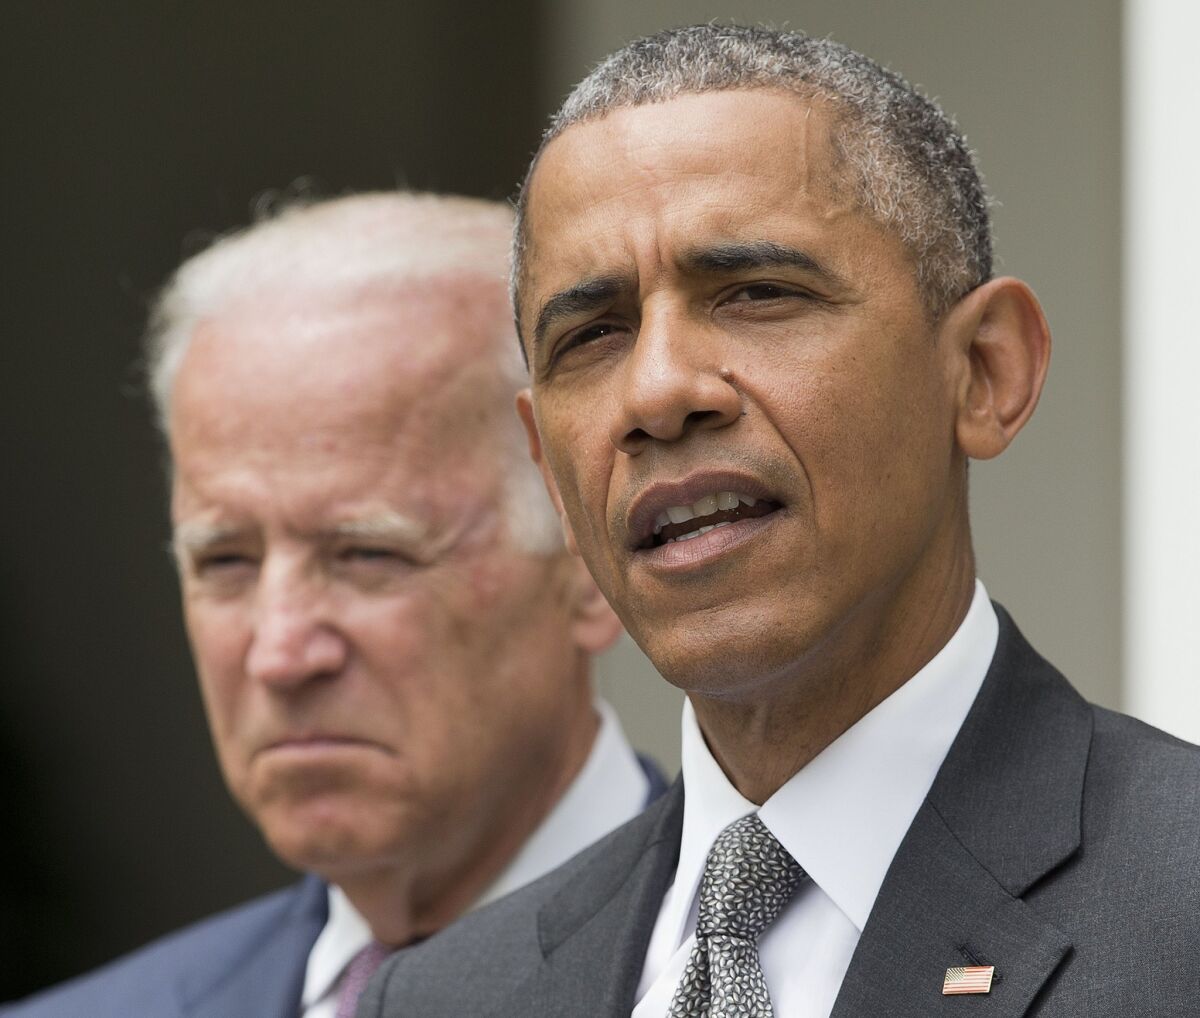 President Obama, accompanied by Vice President Joe Biden, speaks at the White House on June 25, after the U.S. Supreme Court turned aside a legal challenge to the Affordable Care Act.